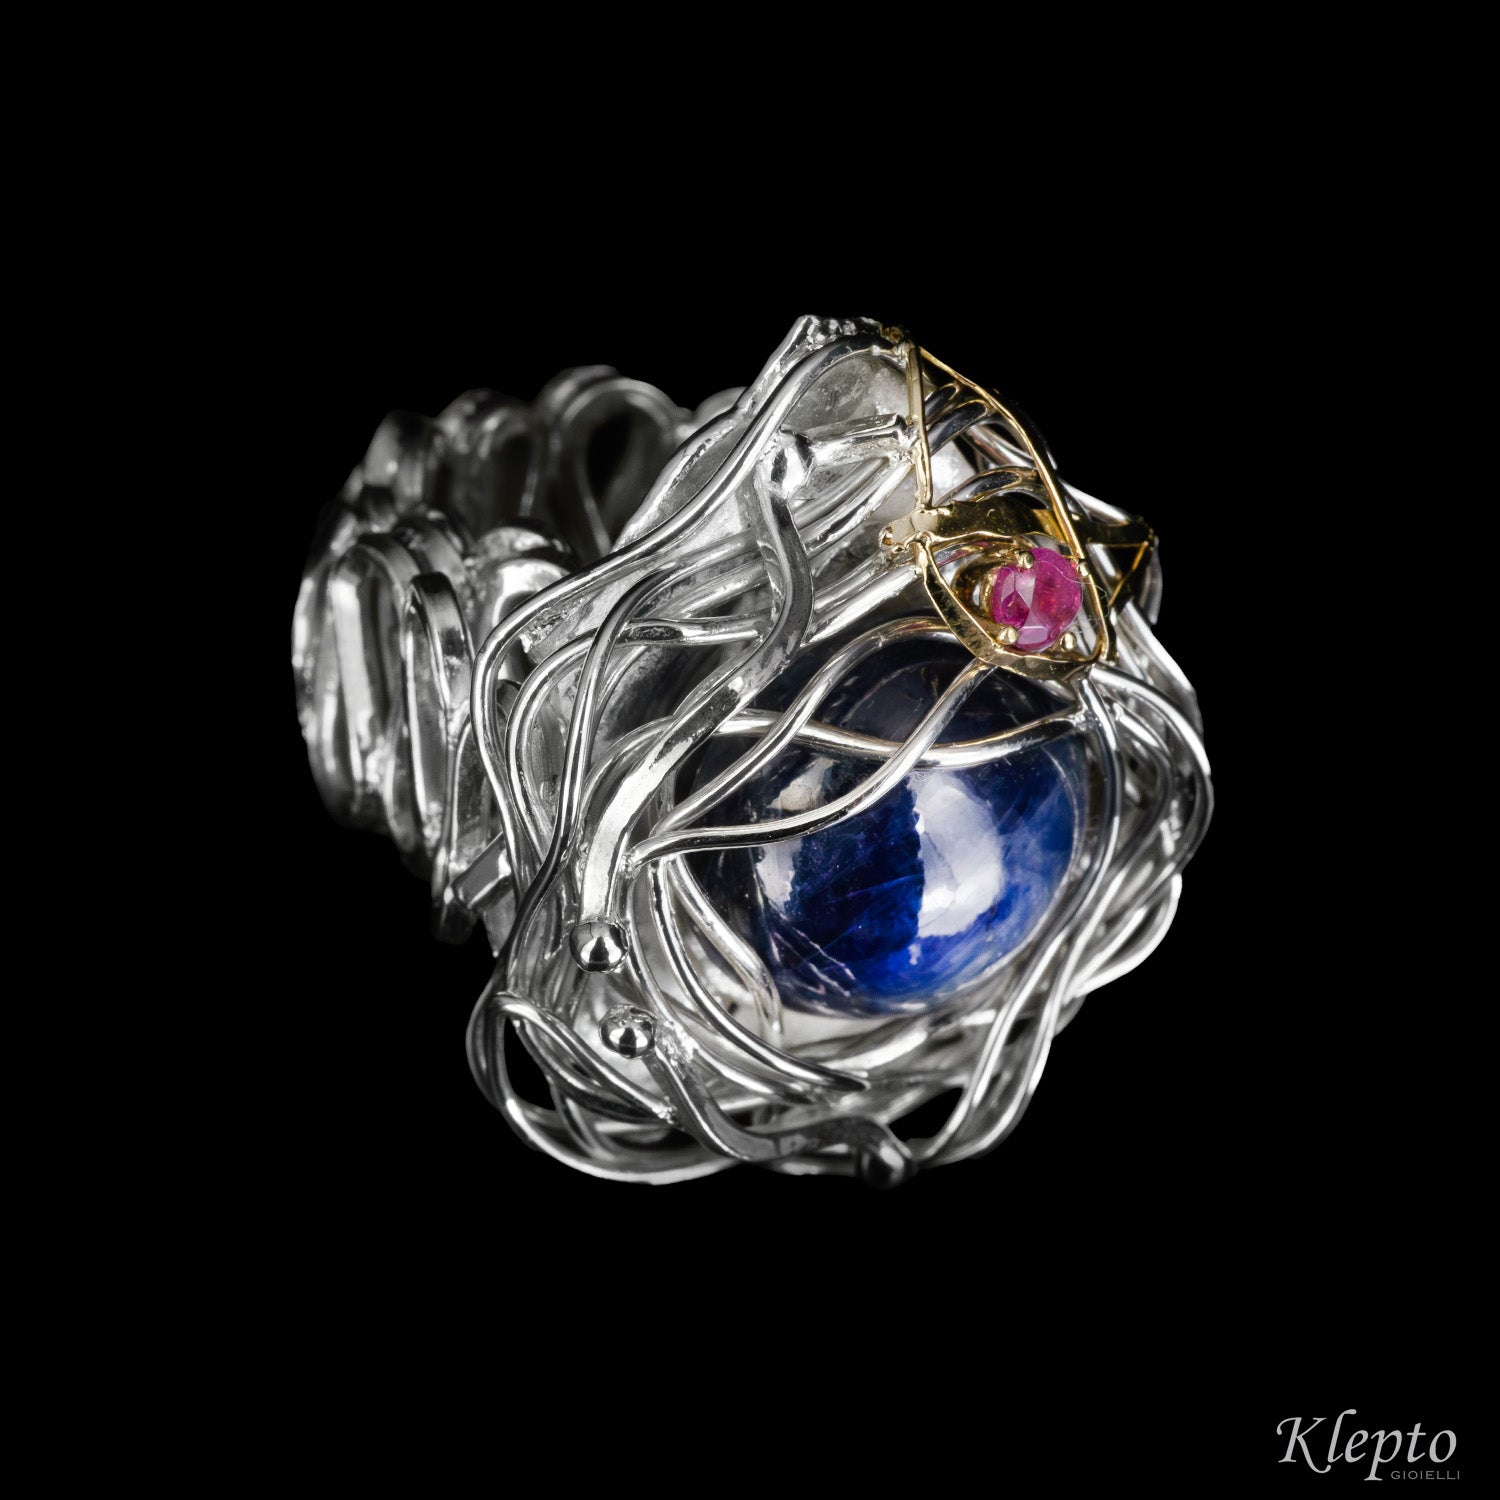 Silnova Silver ring with blue Sapphire, pink Tourmaline and yellow gold details